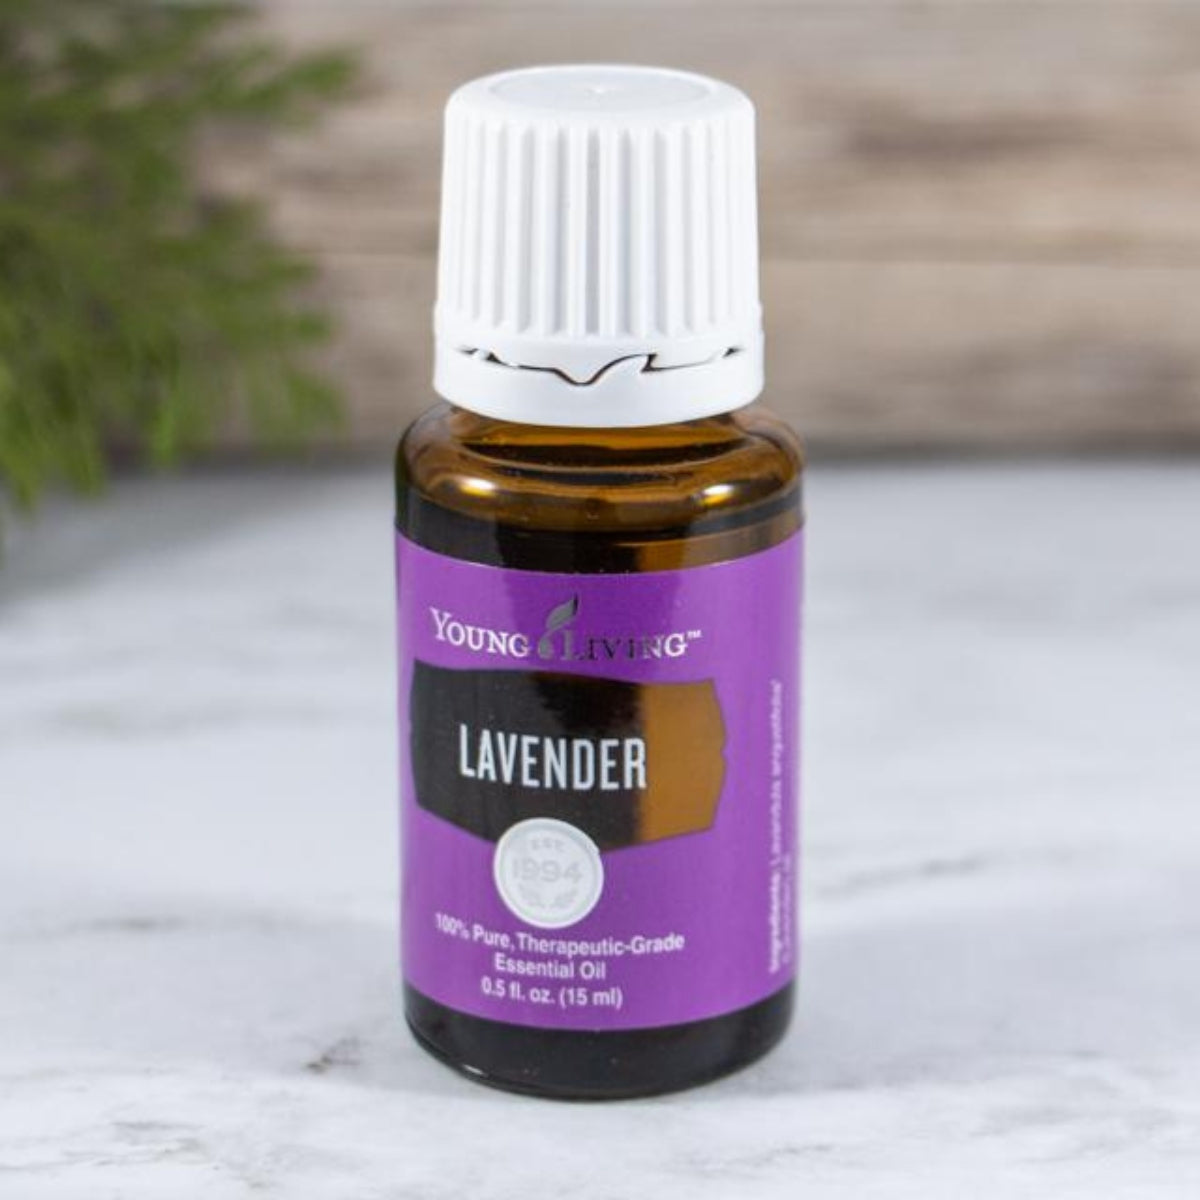 Young Living Essential Oil - Lavender 15ml (Good for sleep and dry